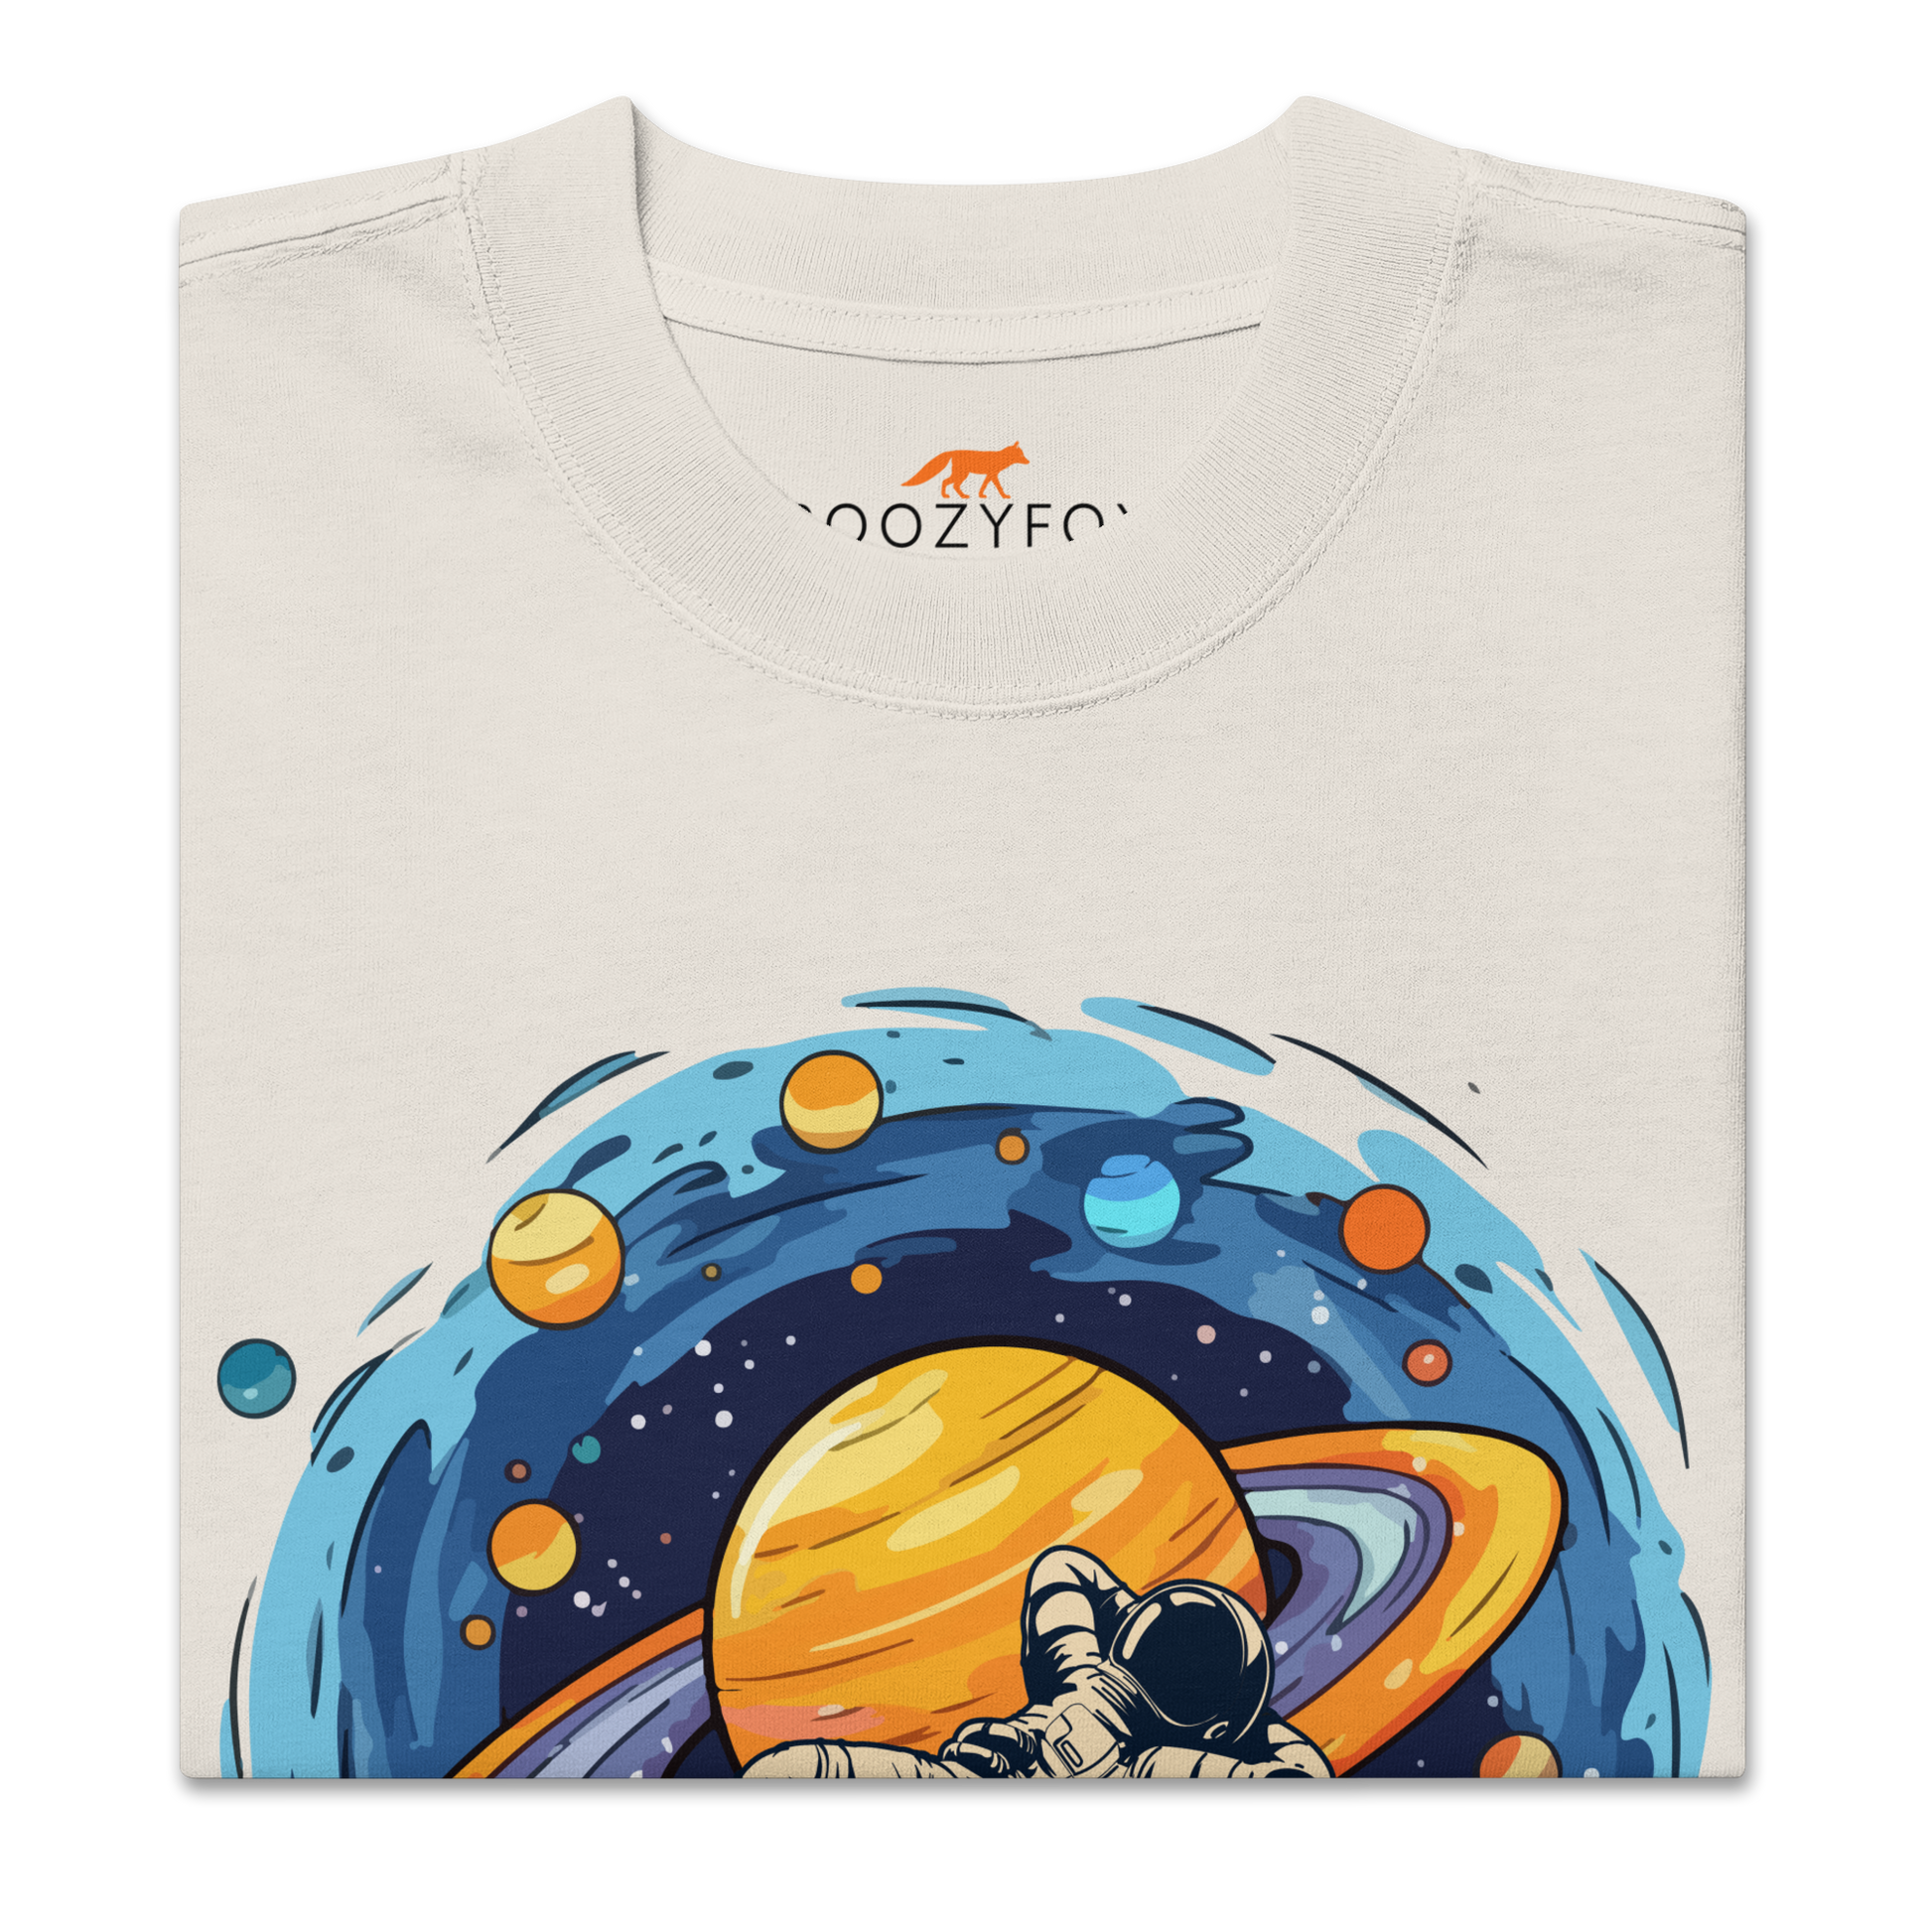 Product details of a Faded Bone Space Oversized T-Shirt featuring a captivating I Need More Space graphic on the chest - Funny Graphic Space Oversized Tees - Boozy Fox